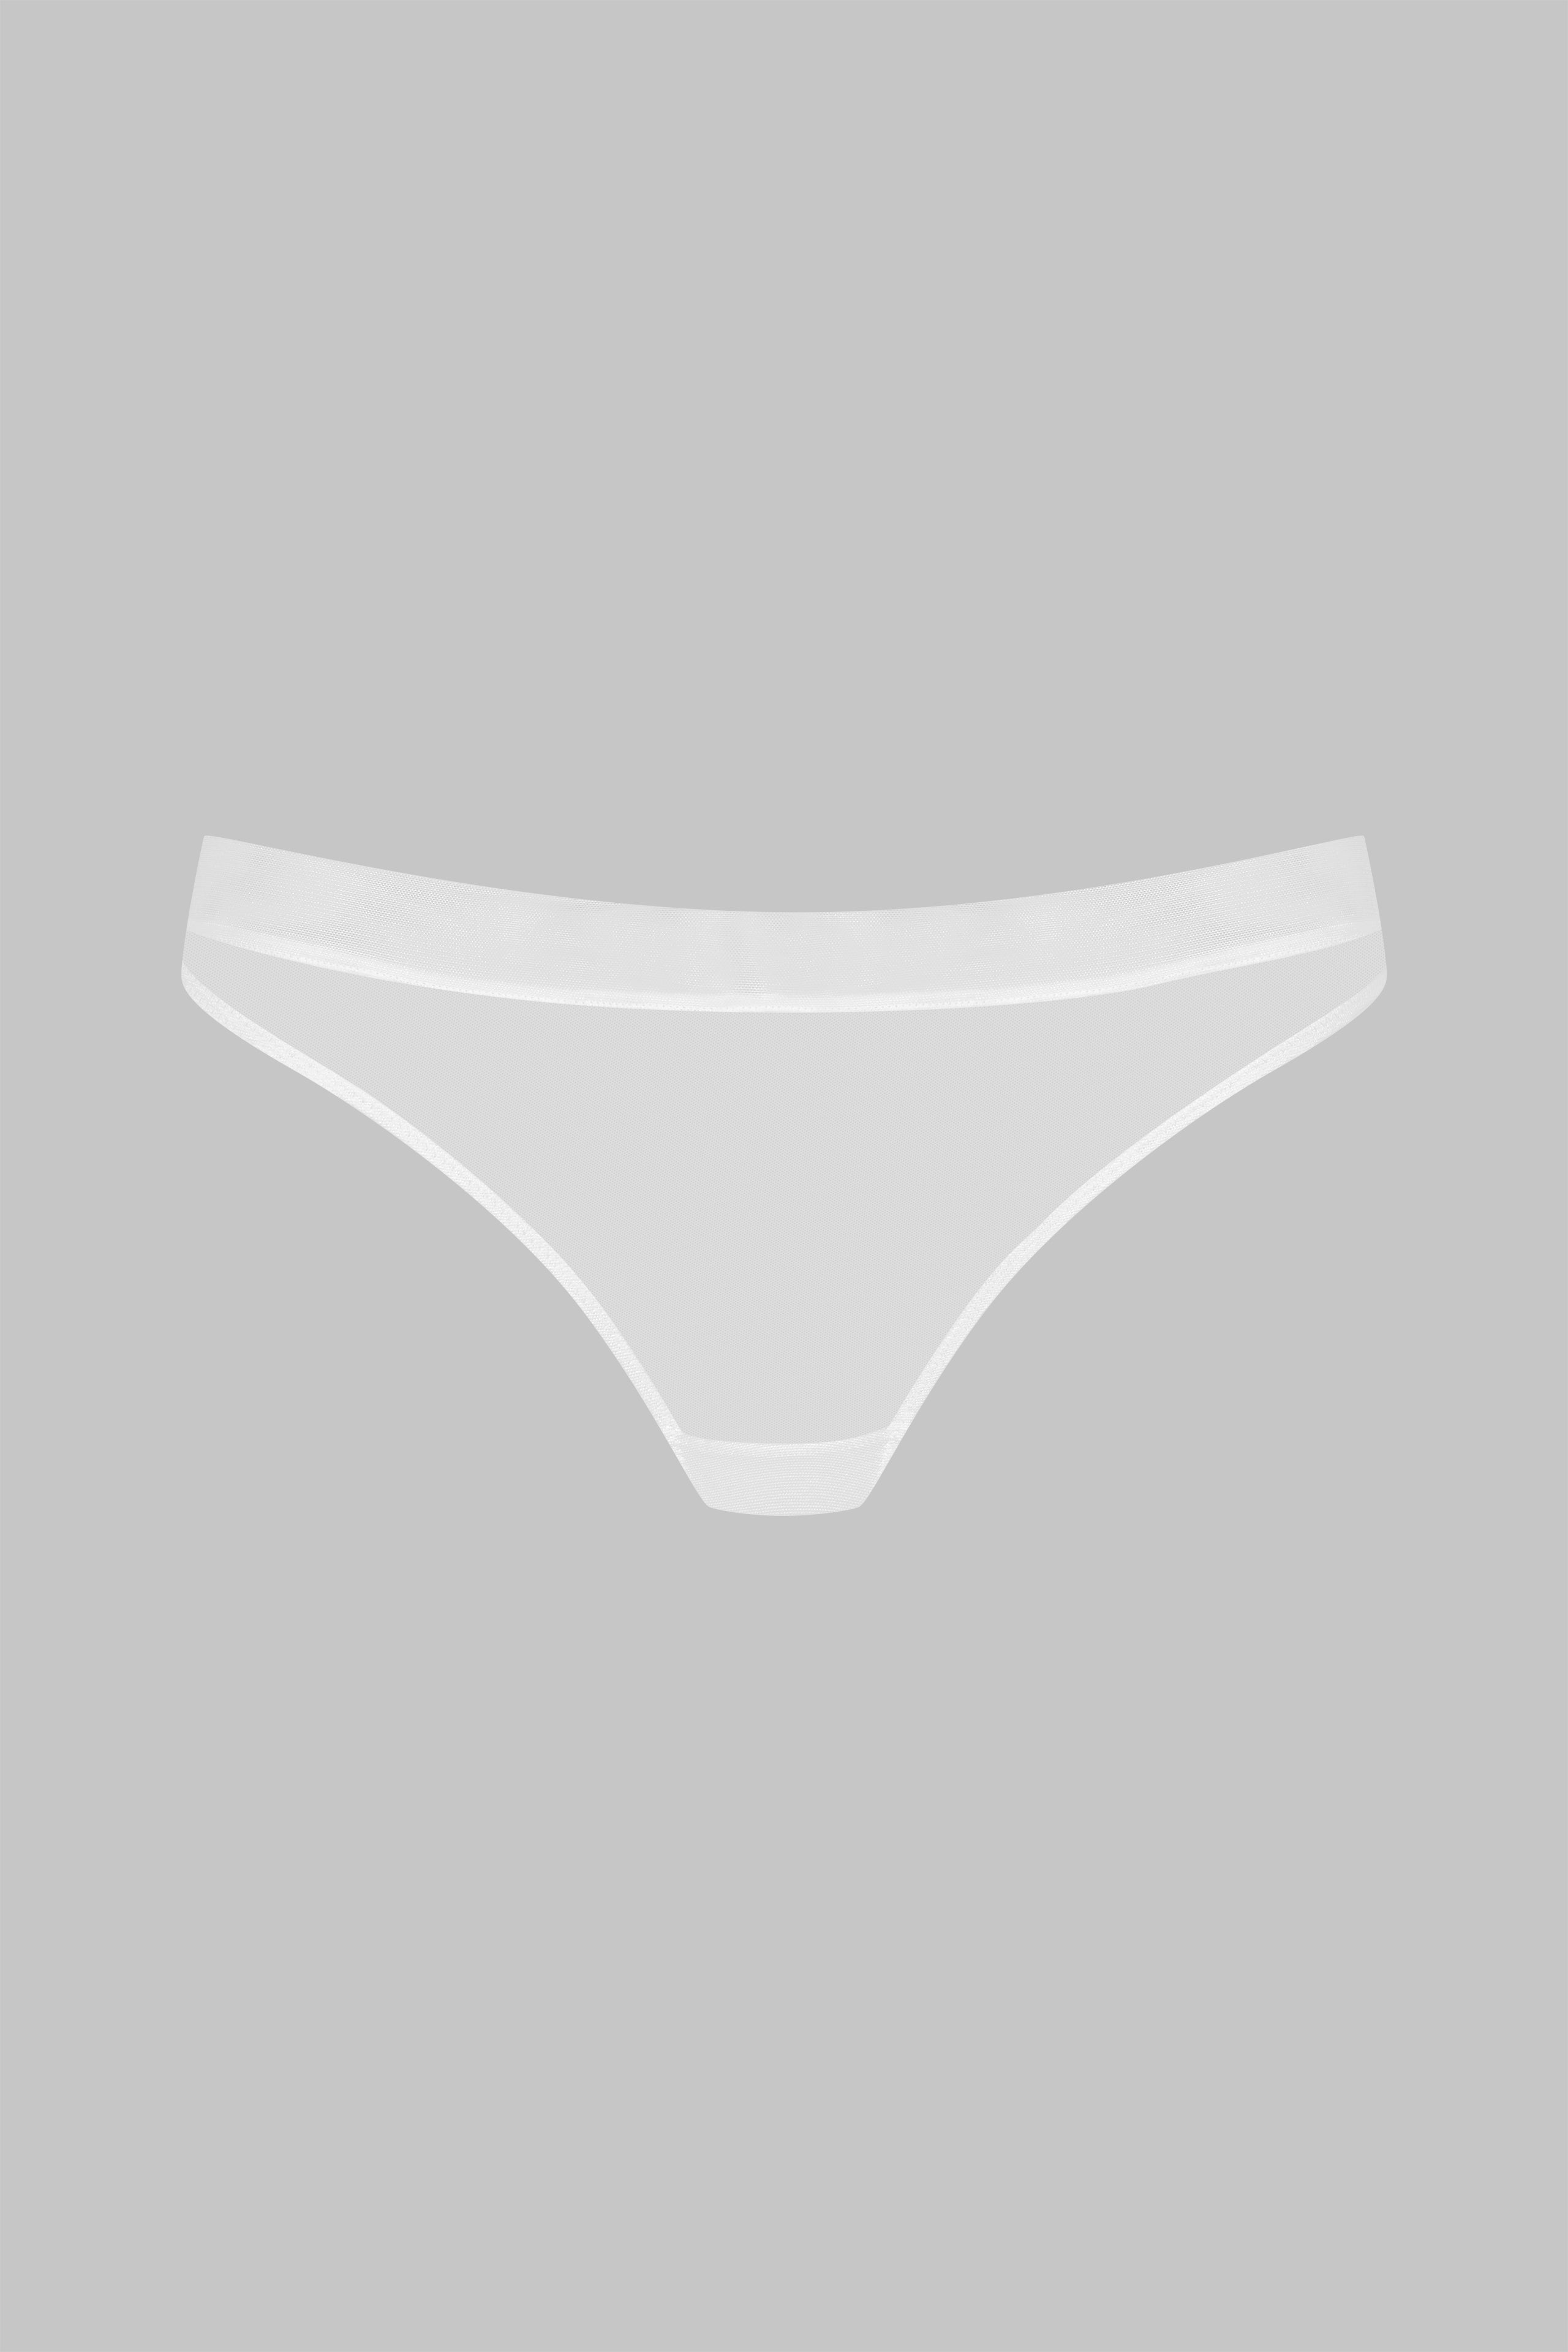 Reversible Panty Body Form Pyramid – Fixtures Close Up